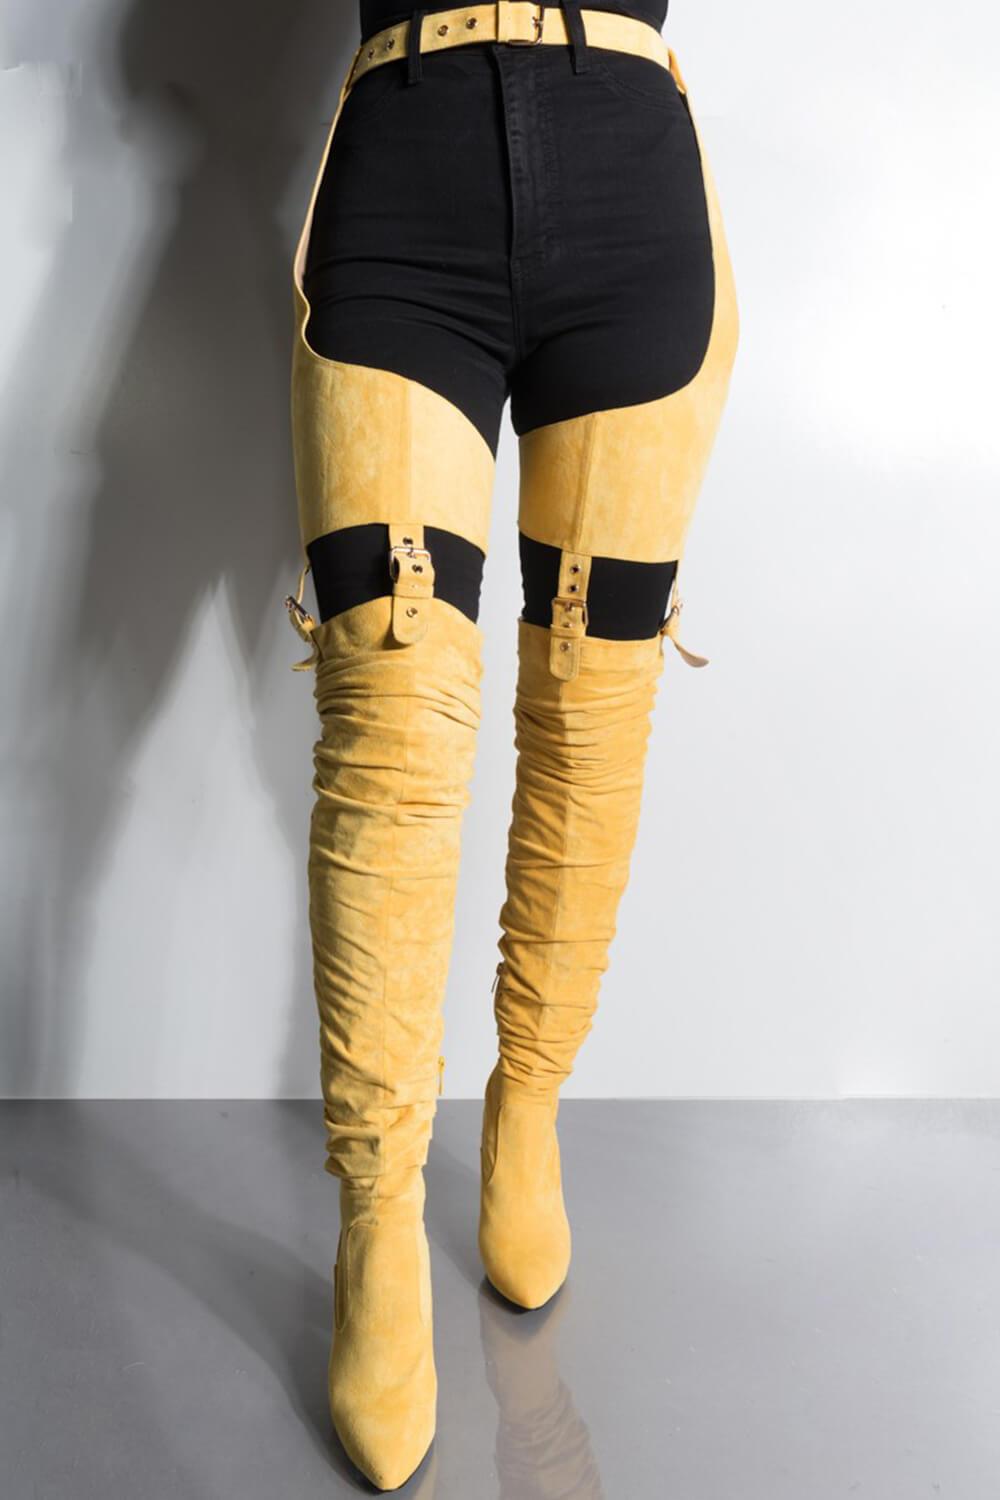 yellow thigh boots